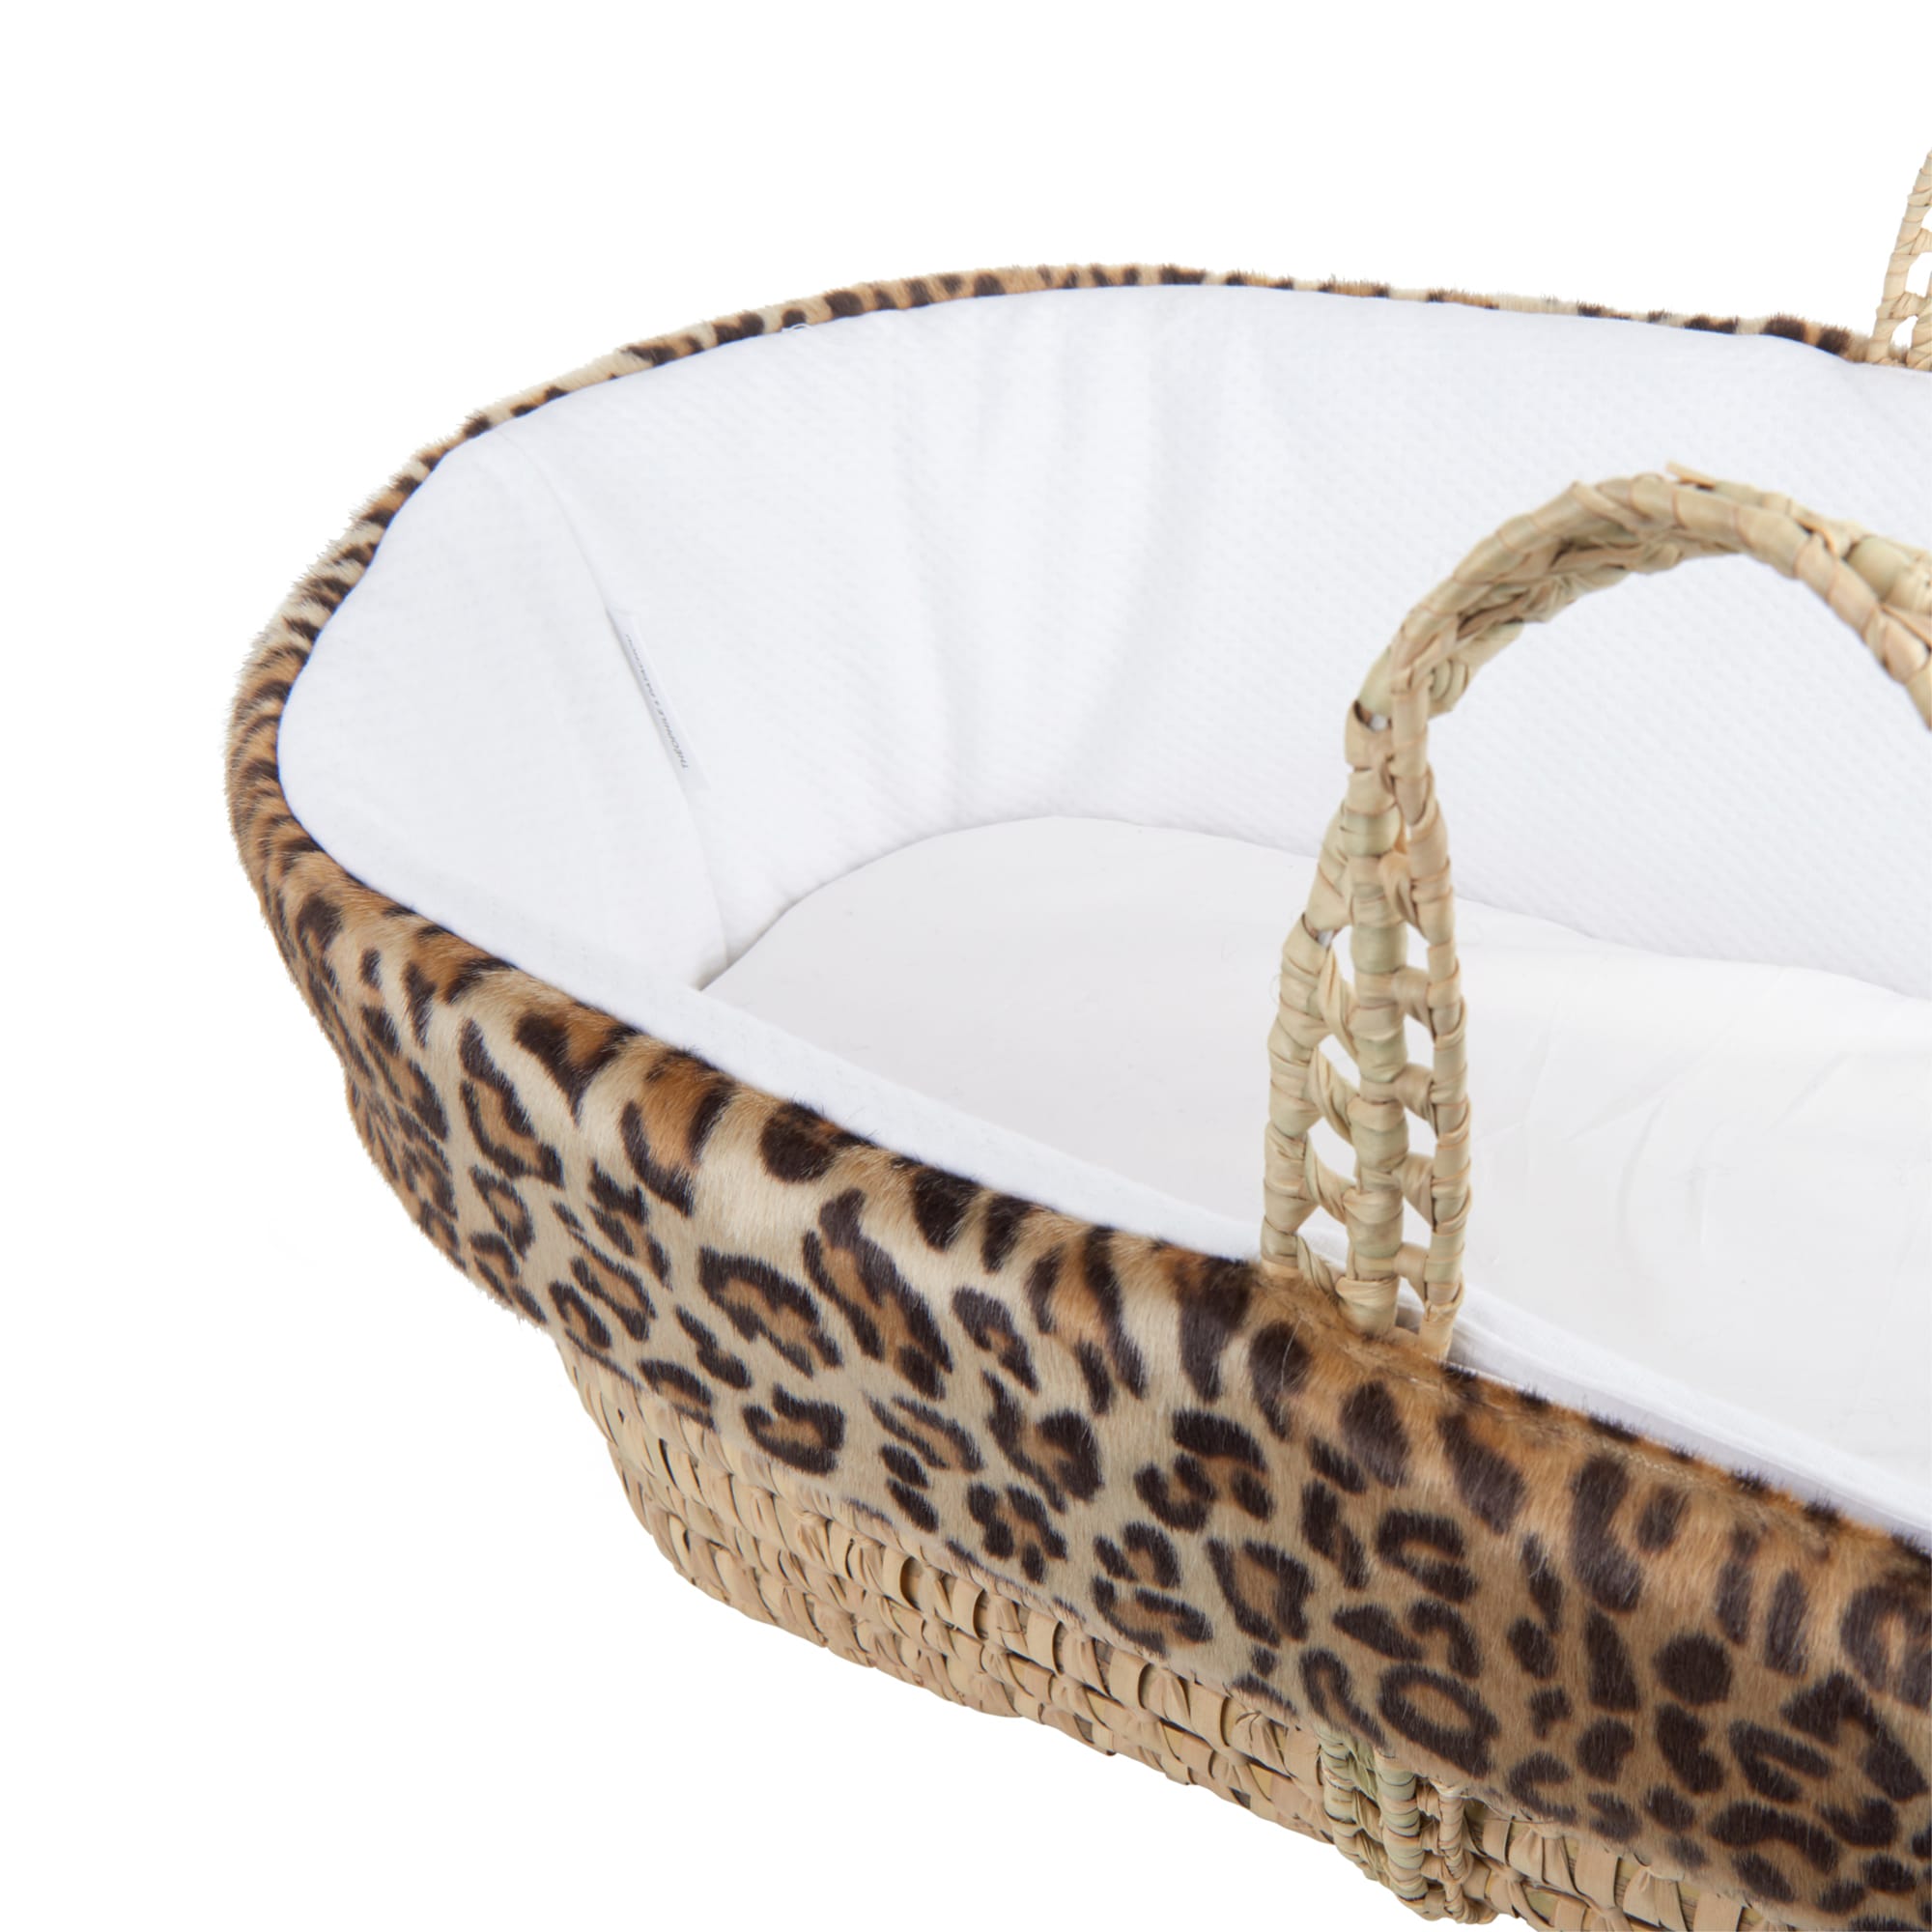 Theophile & Patachou Wicker Moses Basket - Limited Edition